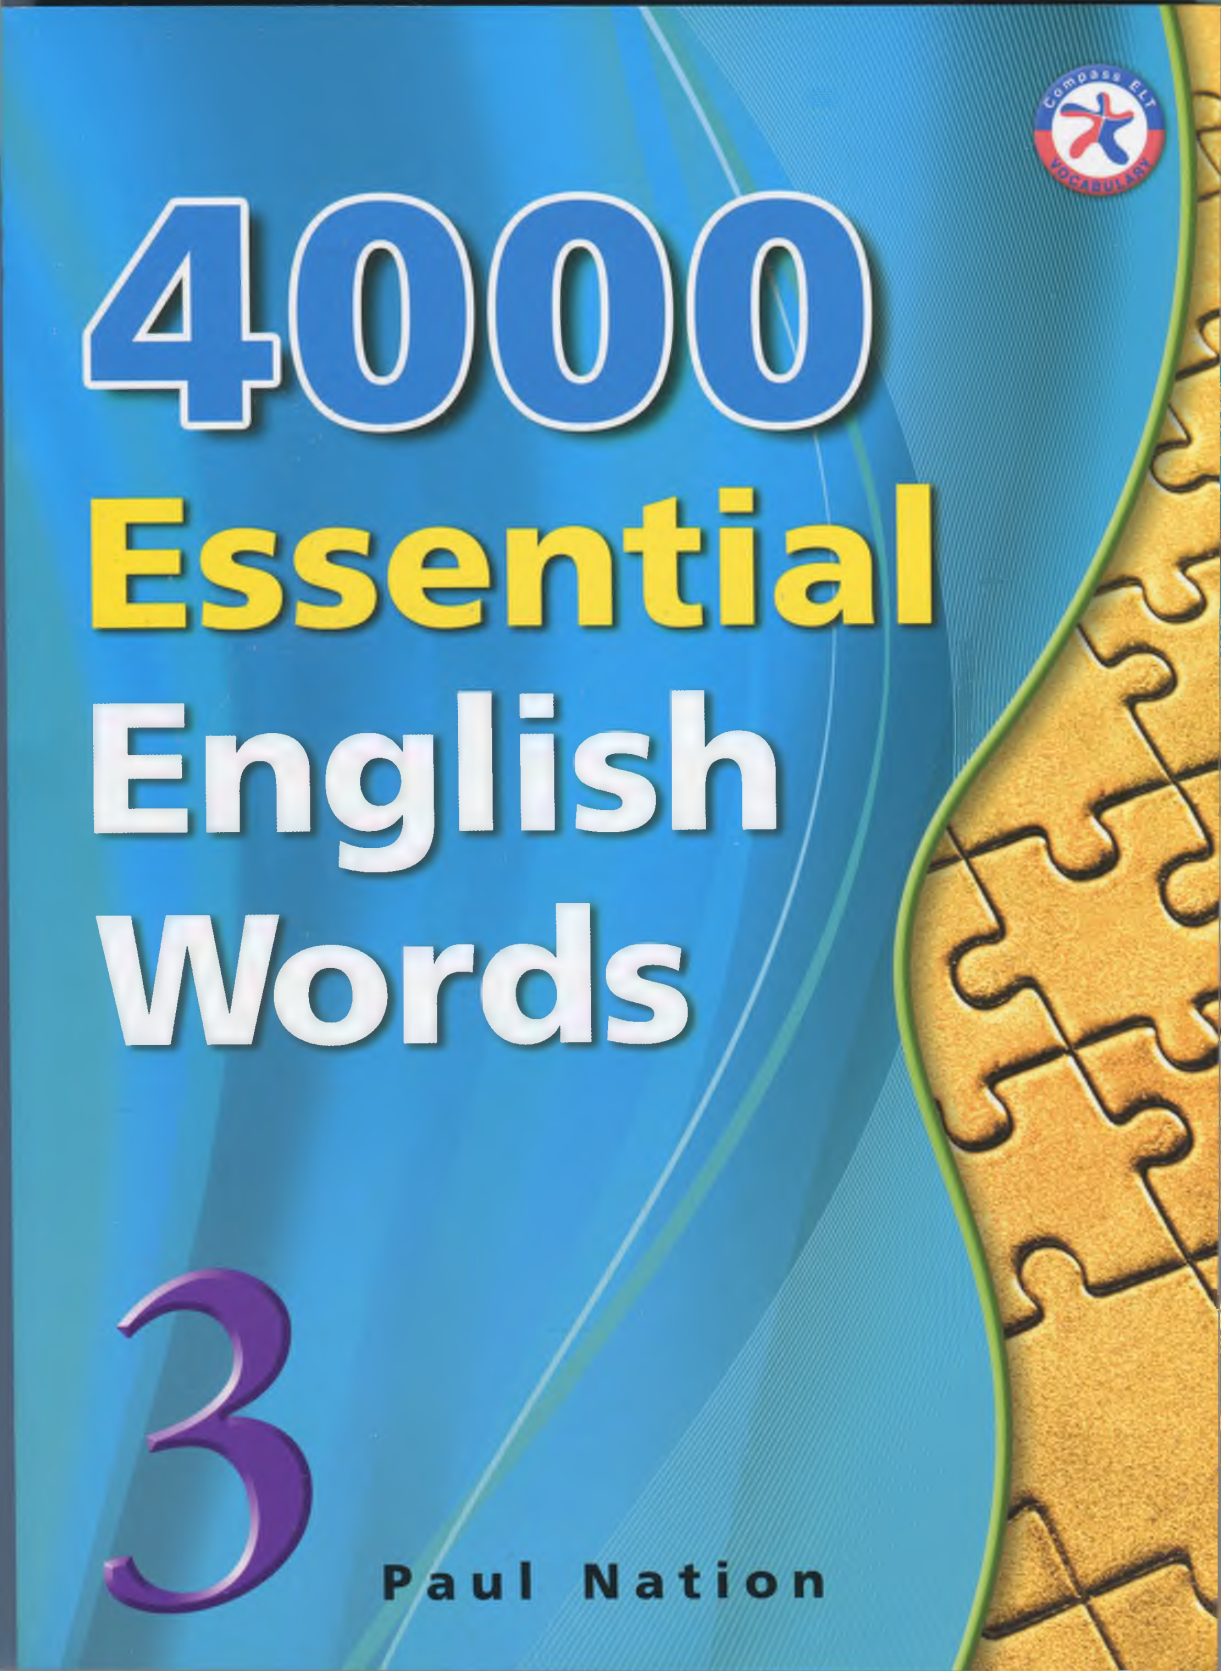 Rich Results on Google's SERP when searching for '4000 Essential English Words Book 3'